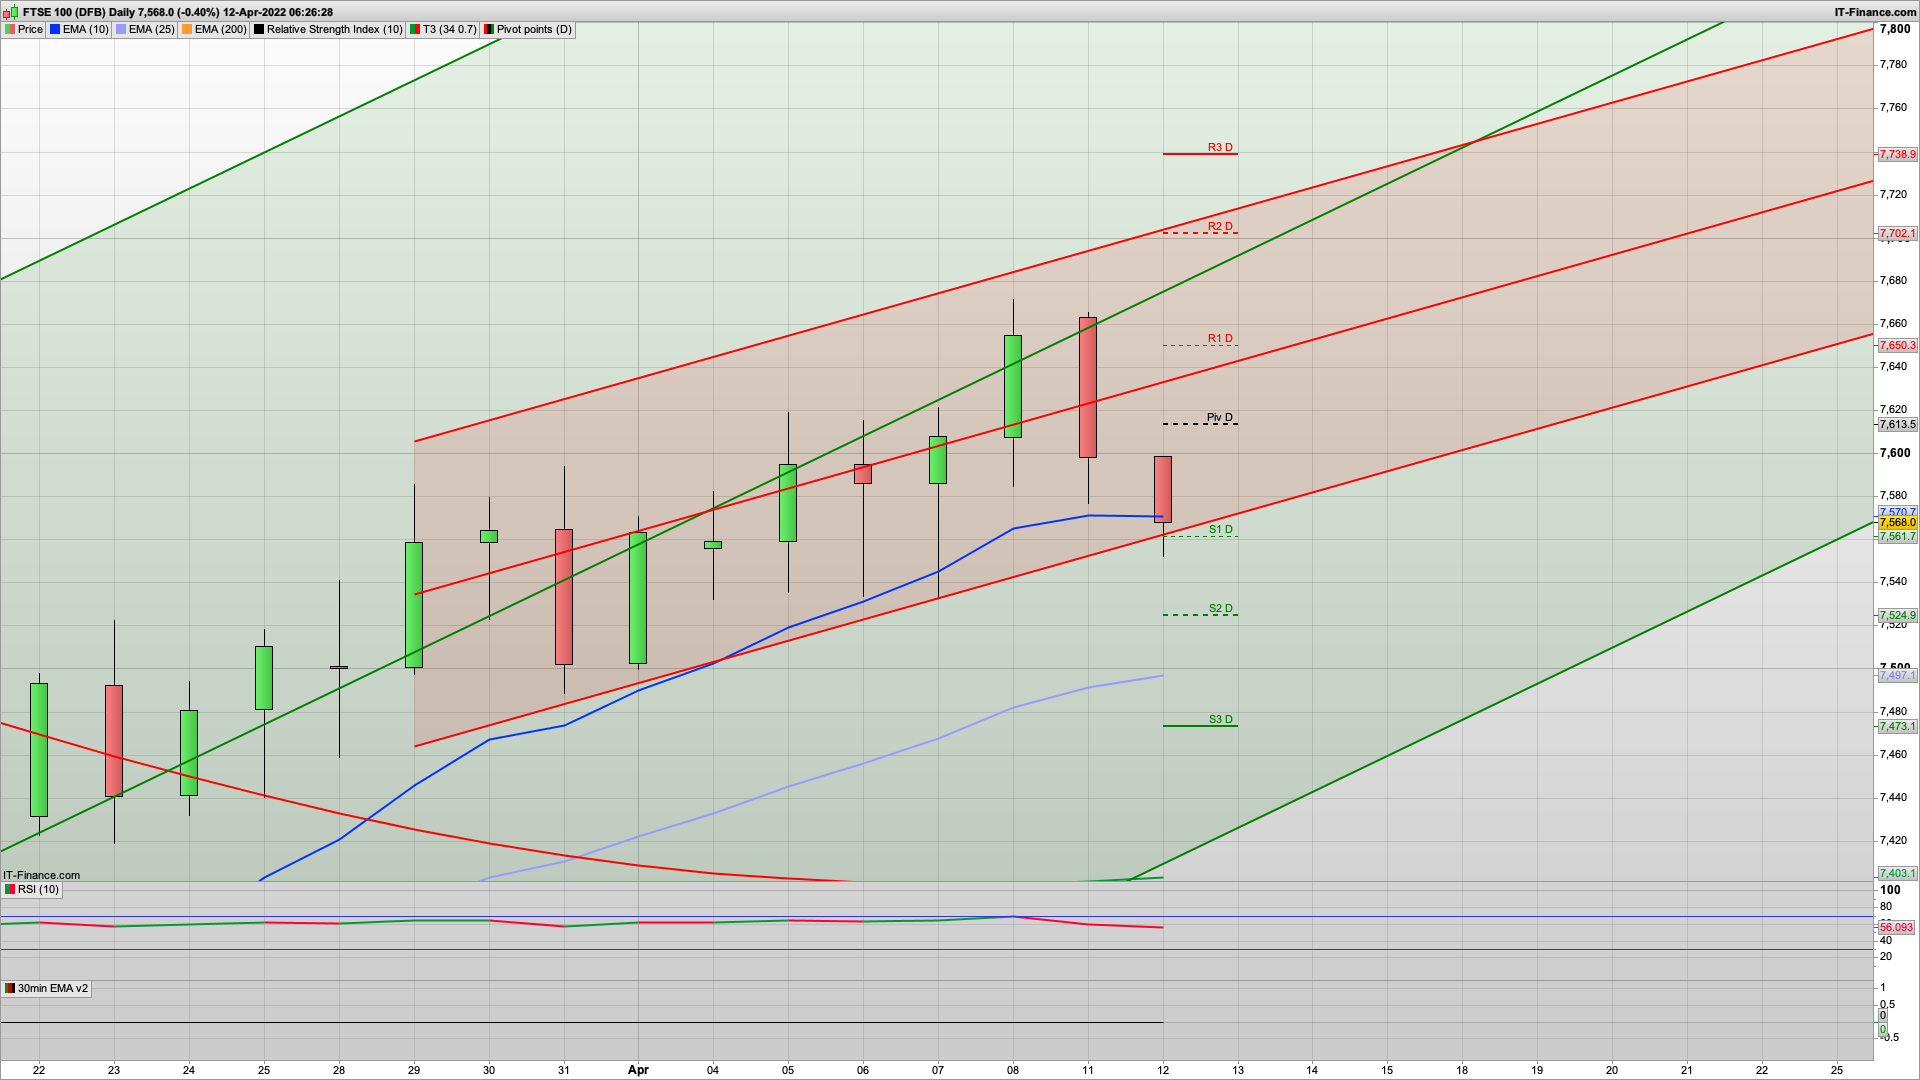 Looking bearish and the bulls will need to break 7600 now | 7624 above | 7500 7473 support